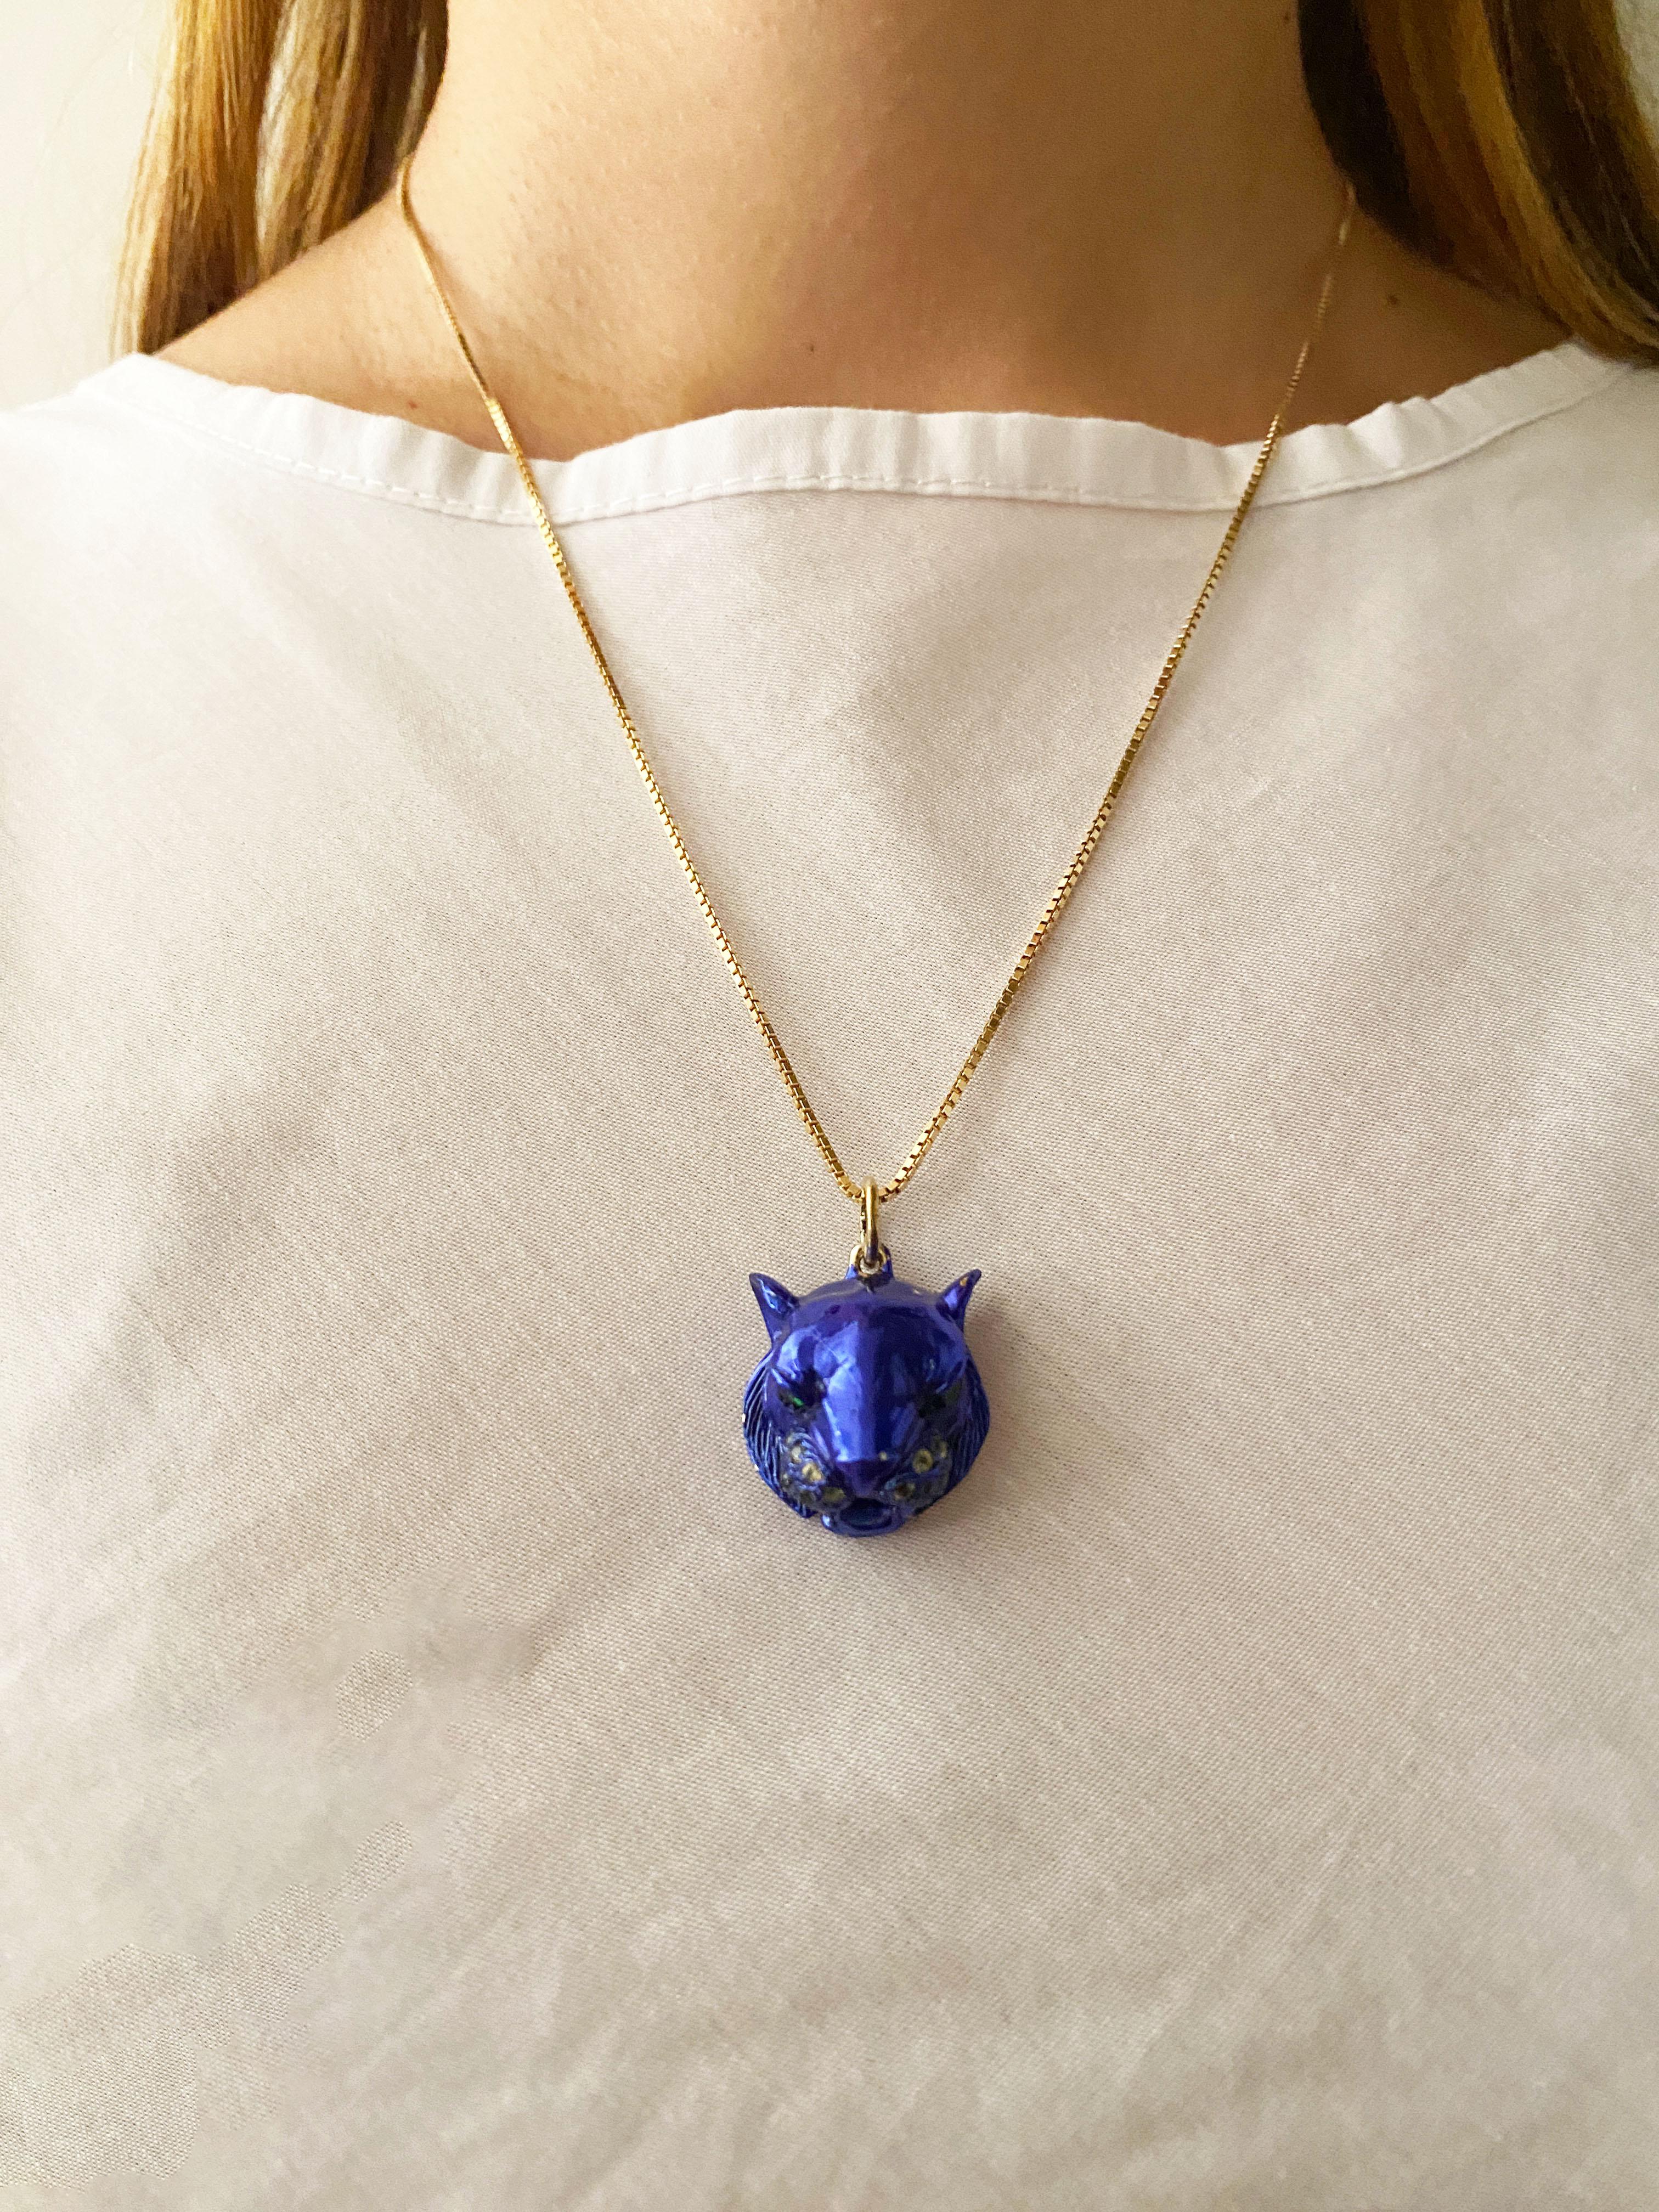 Introducing the Rossella Ugolini Unisex Blue Tiger Pendant a sterling silver and blue Ceramic masterpiece, handcrafted in Italy. This captivating pendant showcases a powerful tiger with green tsavorite eyes and a yellow sapphire-adorned mustache,